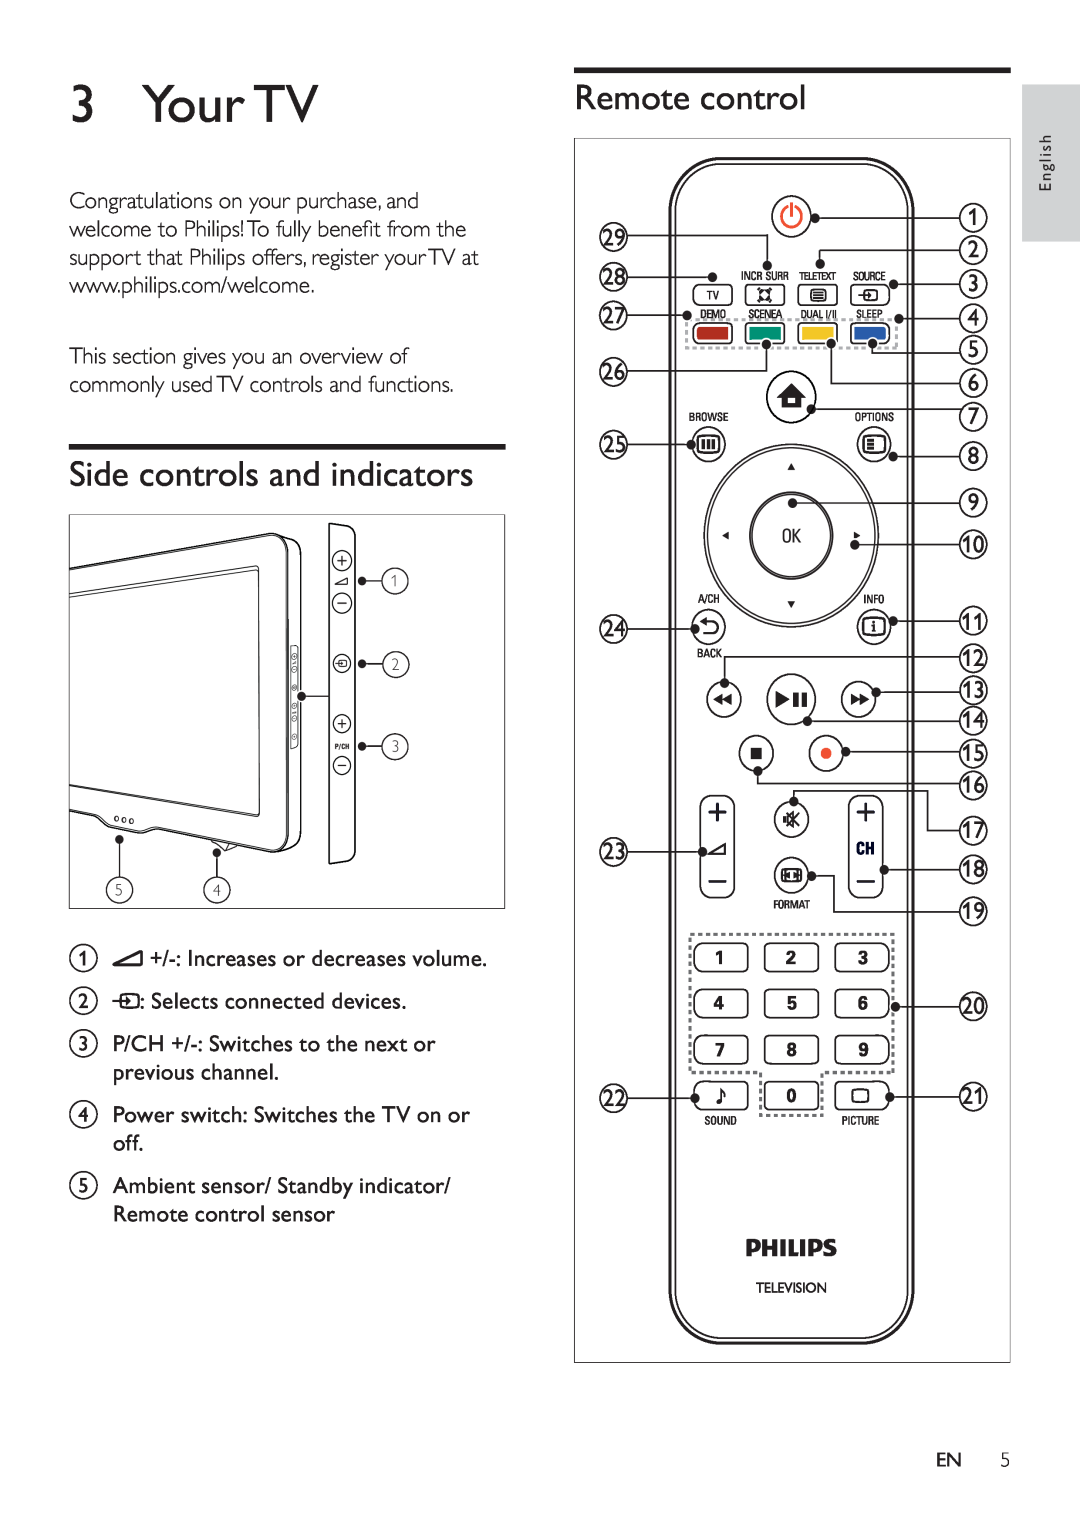 Philips 40PFL5605/98, 40PFL5605S/98, 32PFL5605/98 user manual Your TV, Side controls and indicators, Remote control, English 